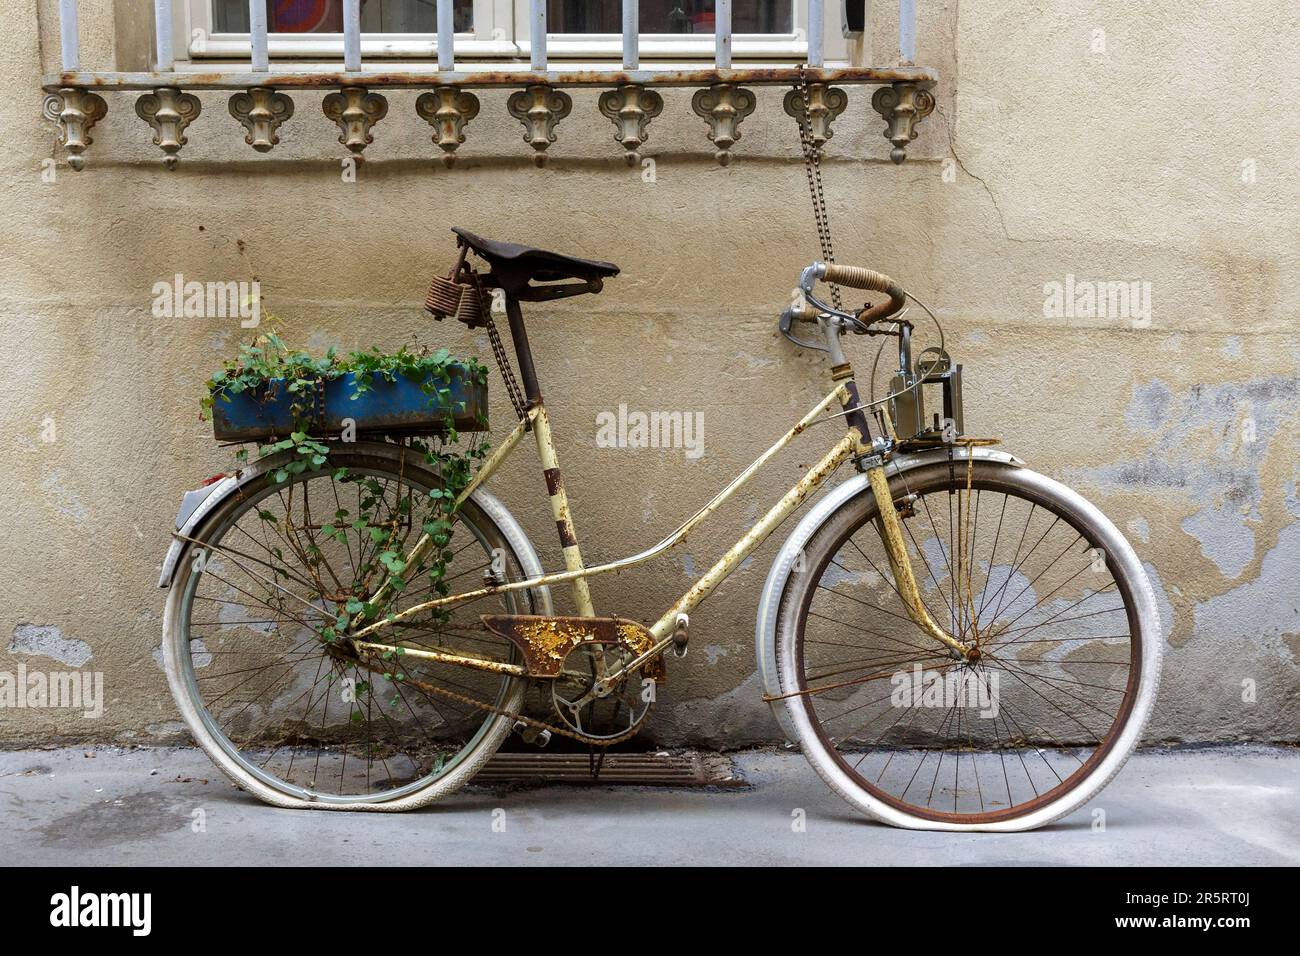 France, Meurthe et Moselle, Nancy, bicycle against the facade of the premises of the Association Dynamo which fix, collect and sell bicycles located at the corner of Grand Rue and Rue du Duc Antoine Stock Photo